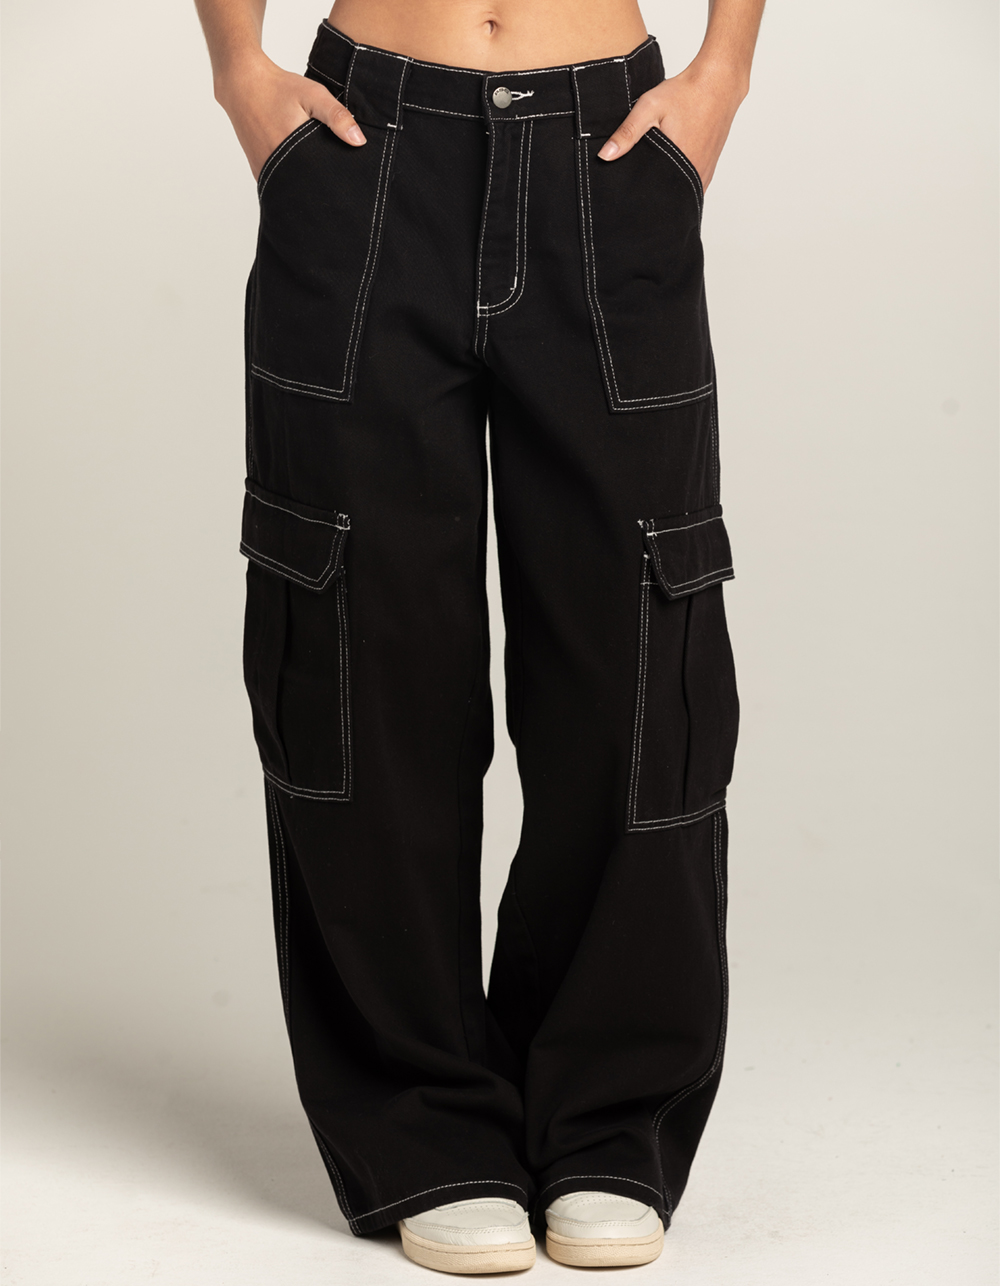 RSQ Womens Baggy Cargo Pants